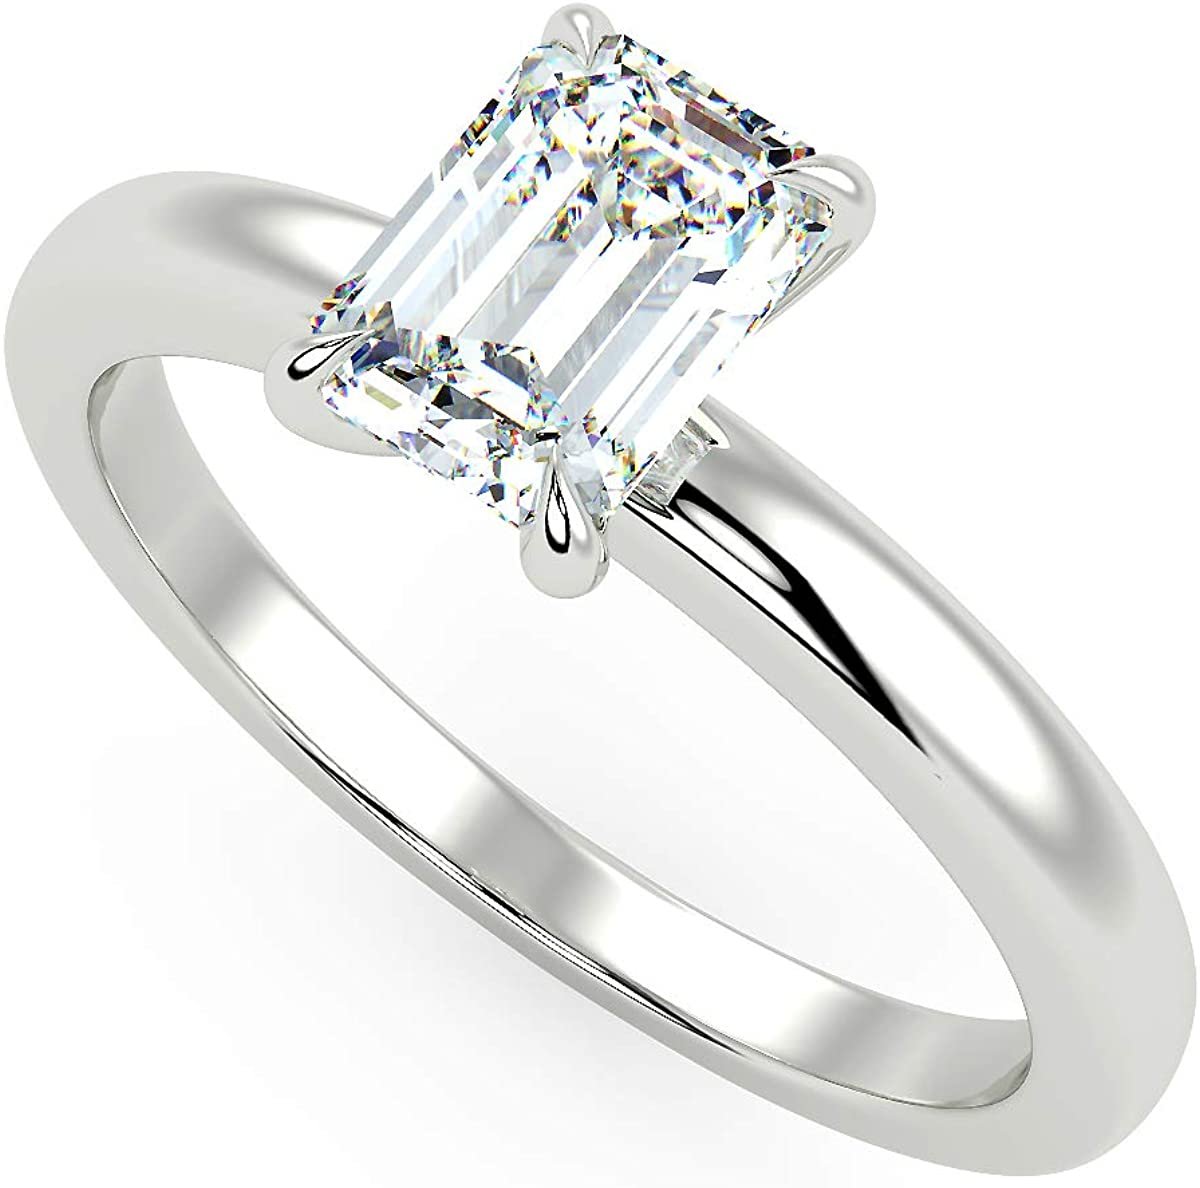 2.0 CT Princess Cut Lab Created Diamond Solitaire Engagement Ring